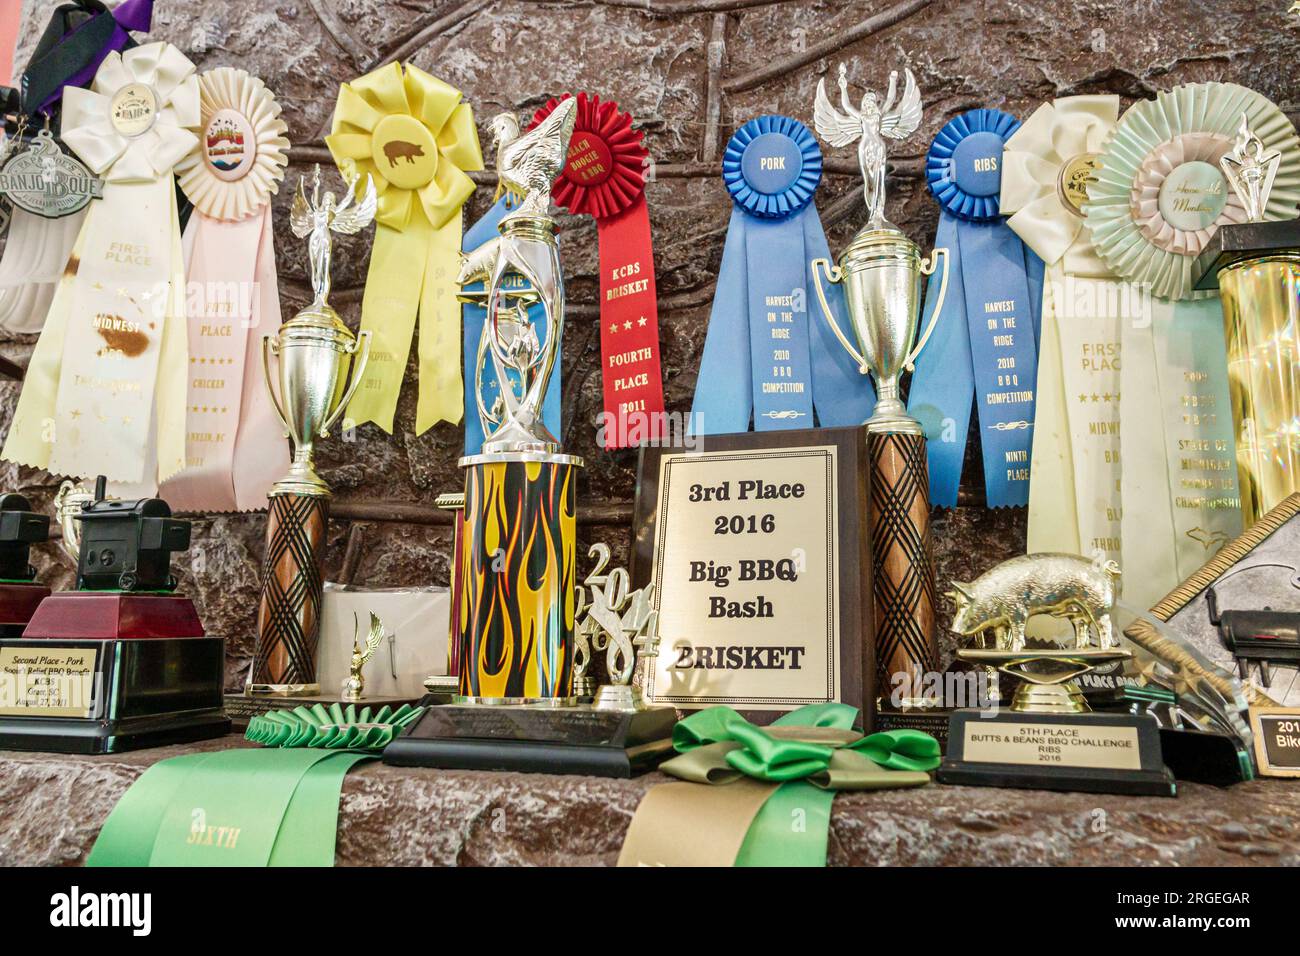 Flat Rock North Carolina,Flat Rock Wood Room,barbeque cook-off contest winning trophies ribbons,inside interior indoors,restaurant dine dining eating Stock Photo